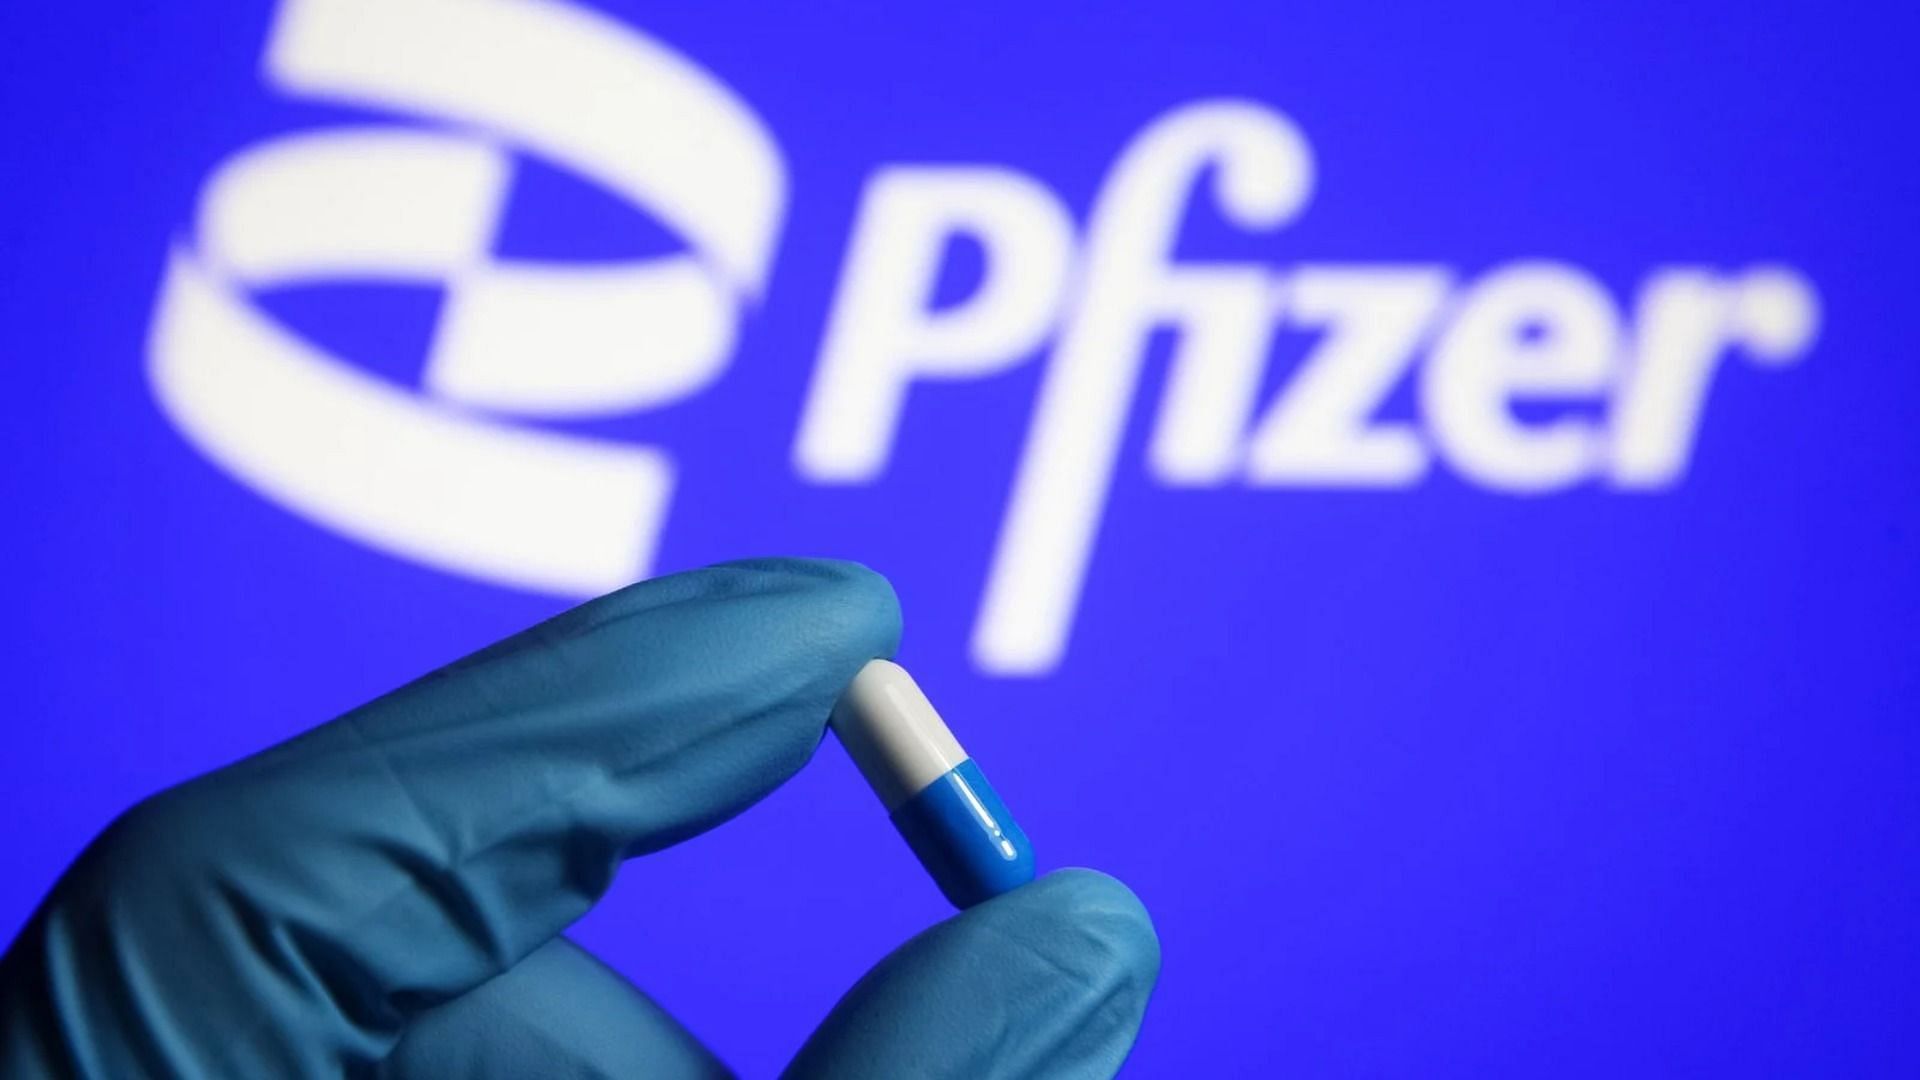 Pfizer has voluntarily recalled its Accupril medicine due to elevated amounts of nitrosamine found in it. (Image via Getty Images/Pavlo Gonchar)